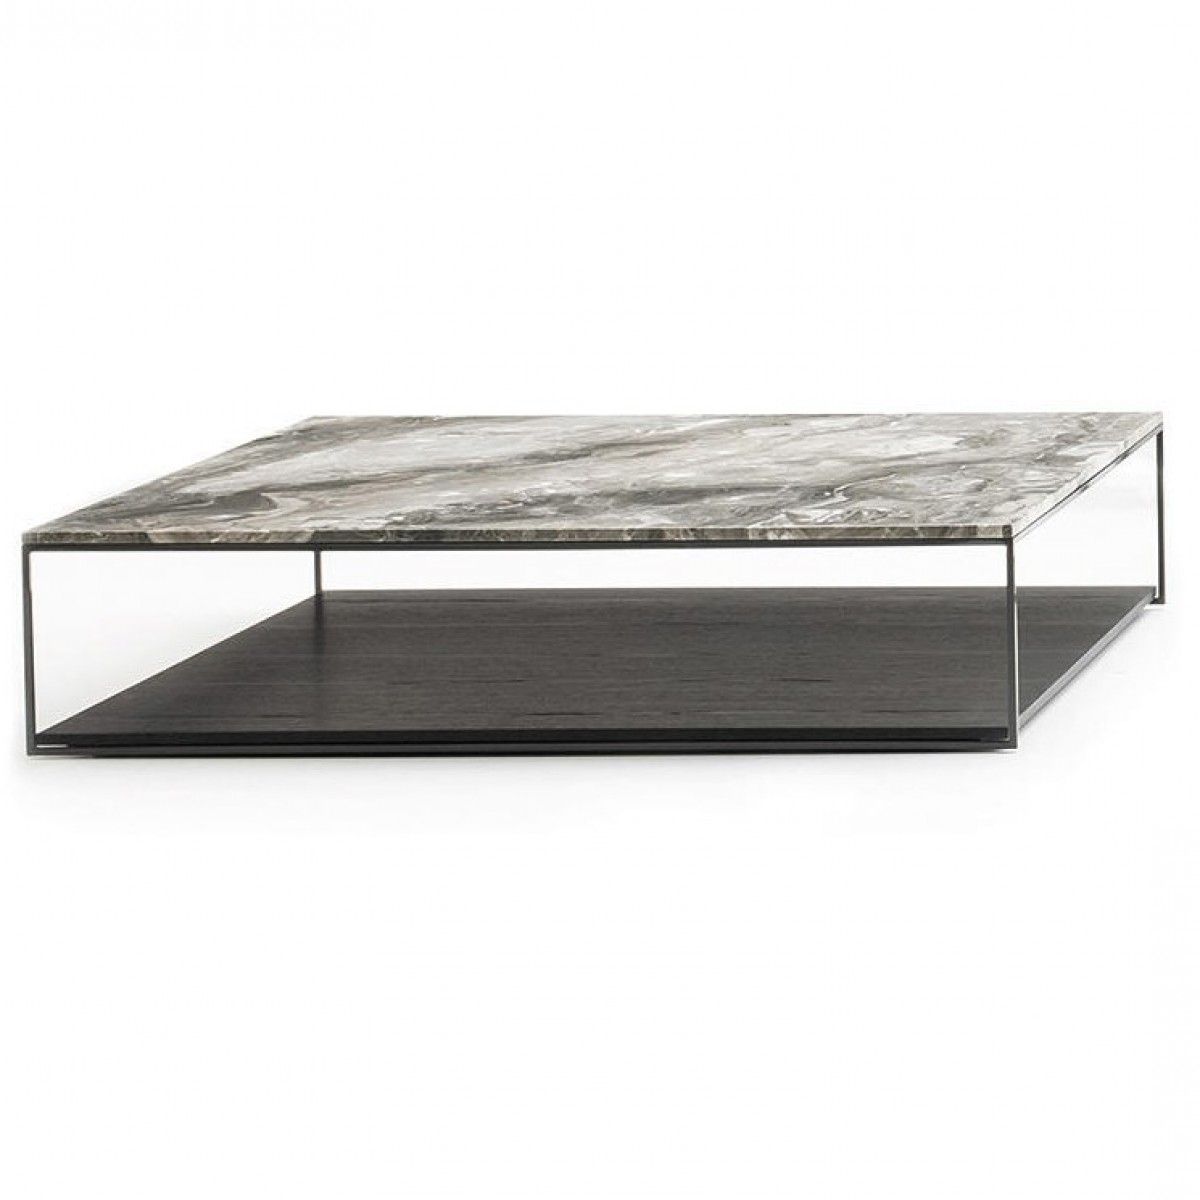 Liam Coffee Table – Square | Minotti | Chanintr For Liam Round Plaster Coffee Tables (View 18 of 20)